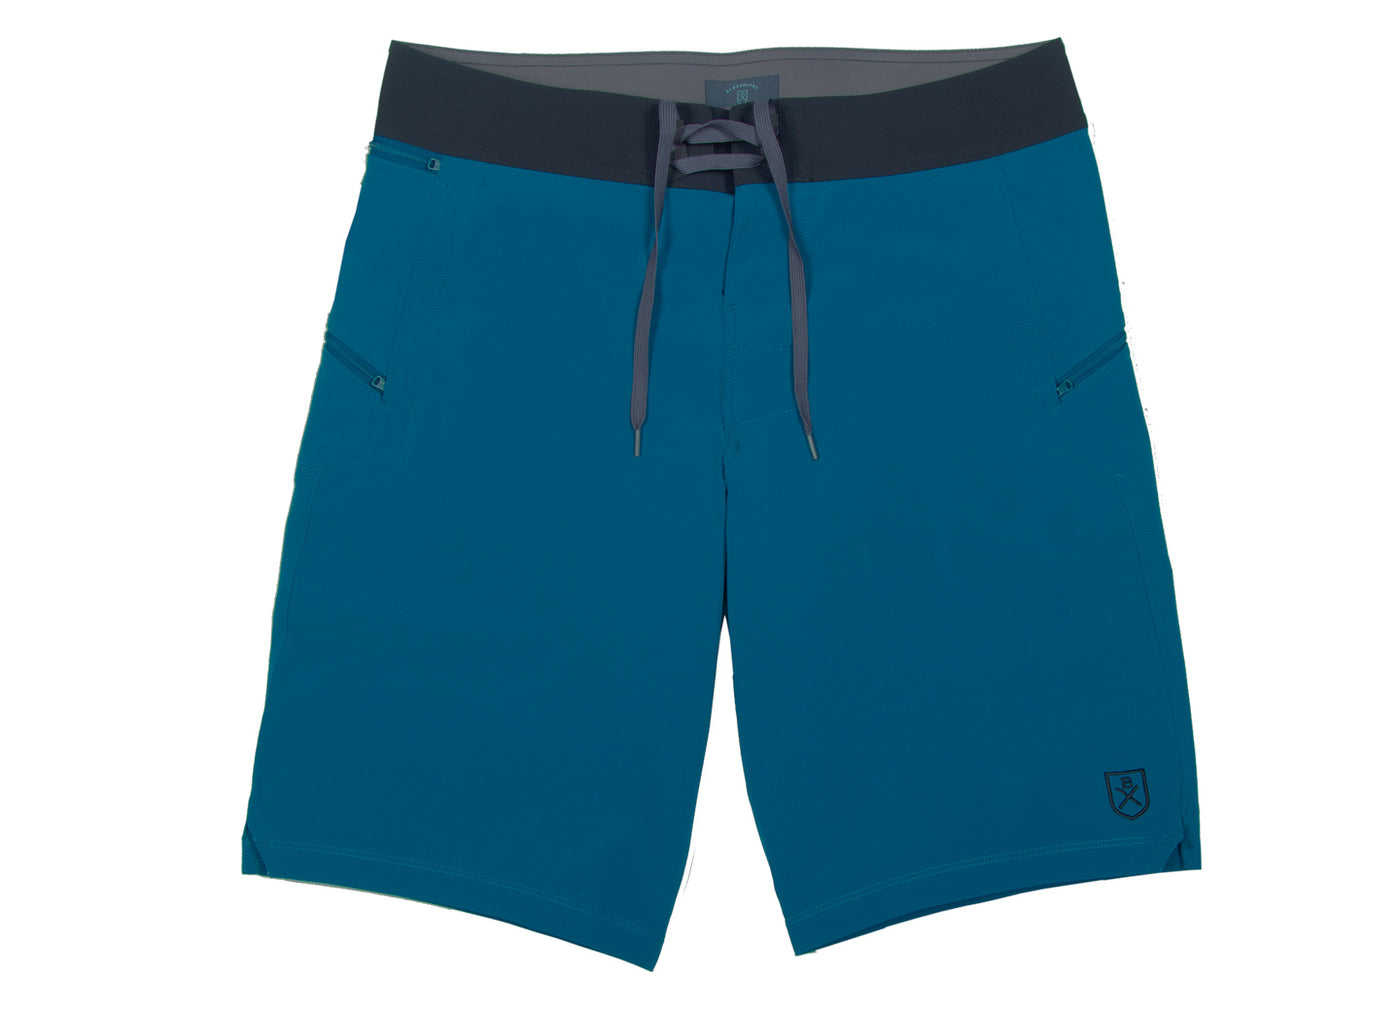 The Spartan Board Shorts - Limited Edition Two-Tone